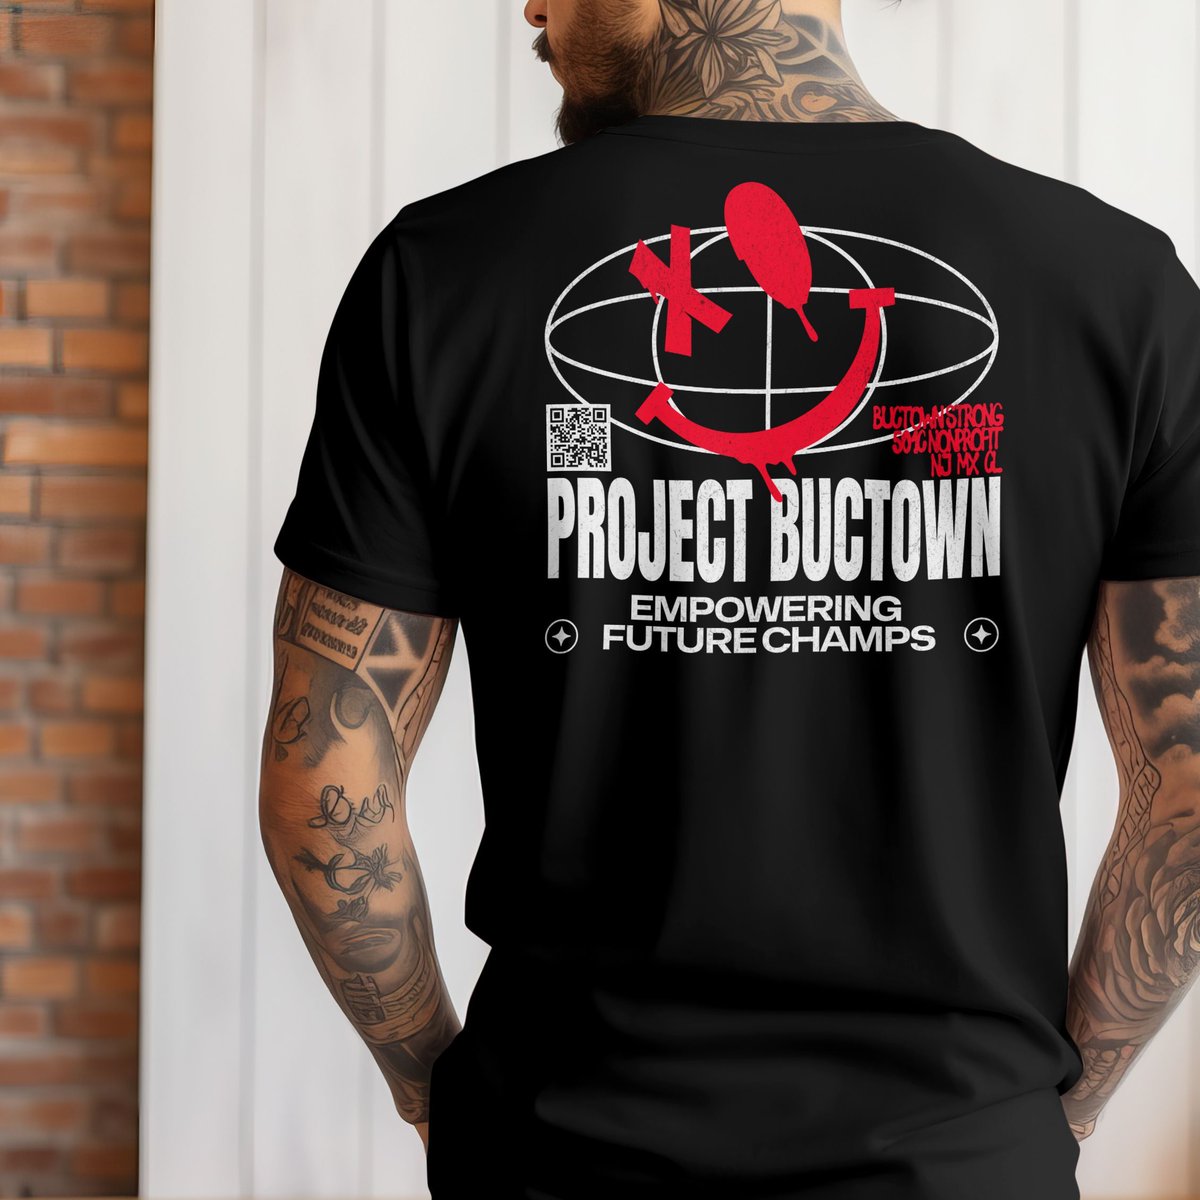 🏆 WAYS to SUPPORT PROJECT BUCTOWN
✨ Donate buctown.org/donate 👈
😎 Shop BCTN Merch
👑 Mint BCTN NFT or Wearable
⚡ Like + Share this post
🥊 Subscribe to our @YouTube Channel
👊 Tell a friend about us!
💥 Show kindness to someone today.
💛 #BuctownStrong #GivingTuesday